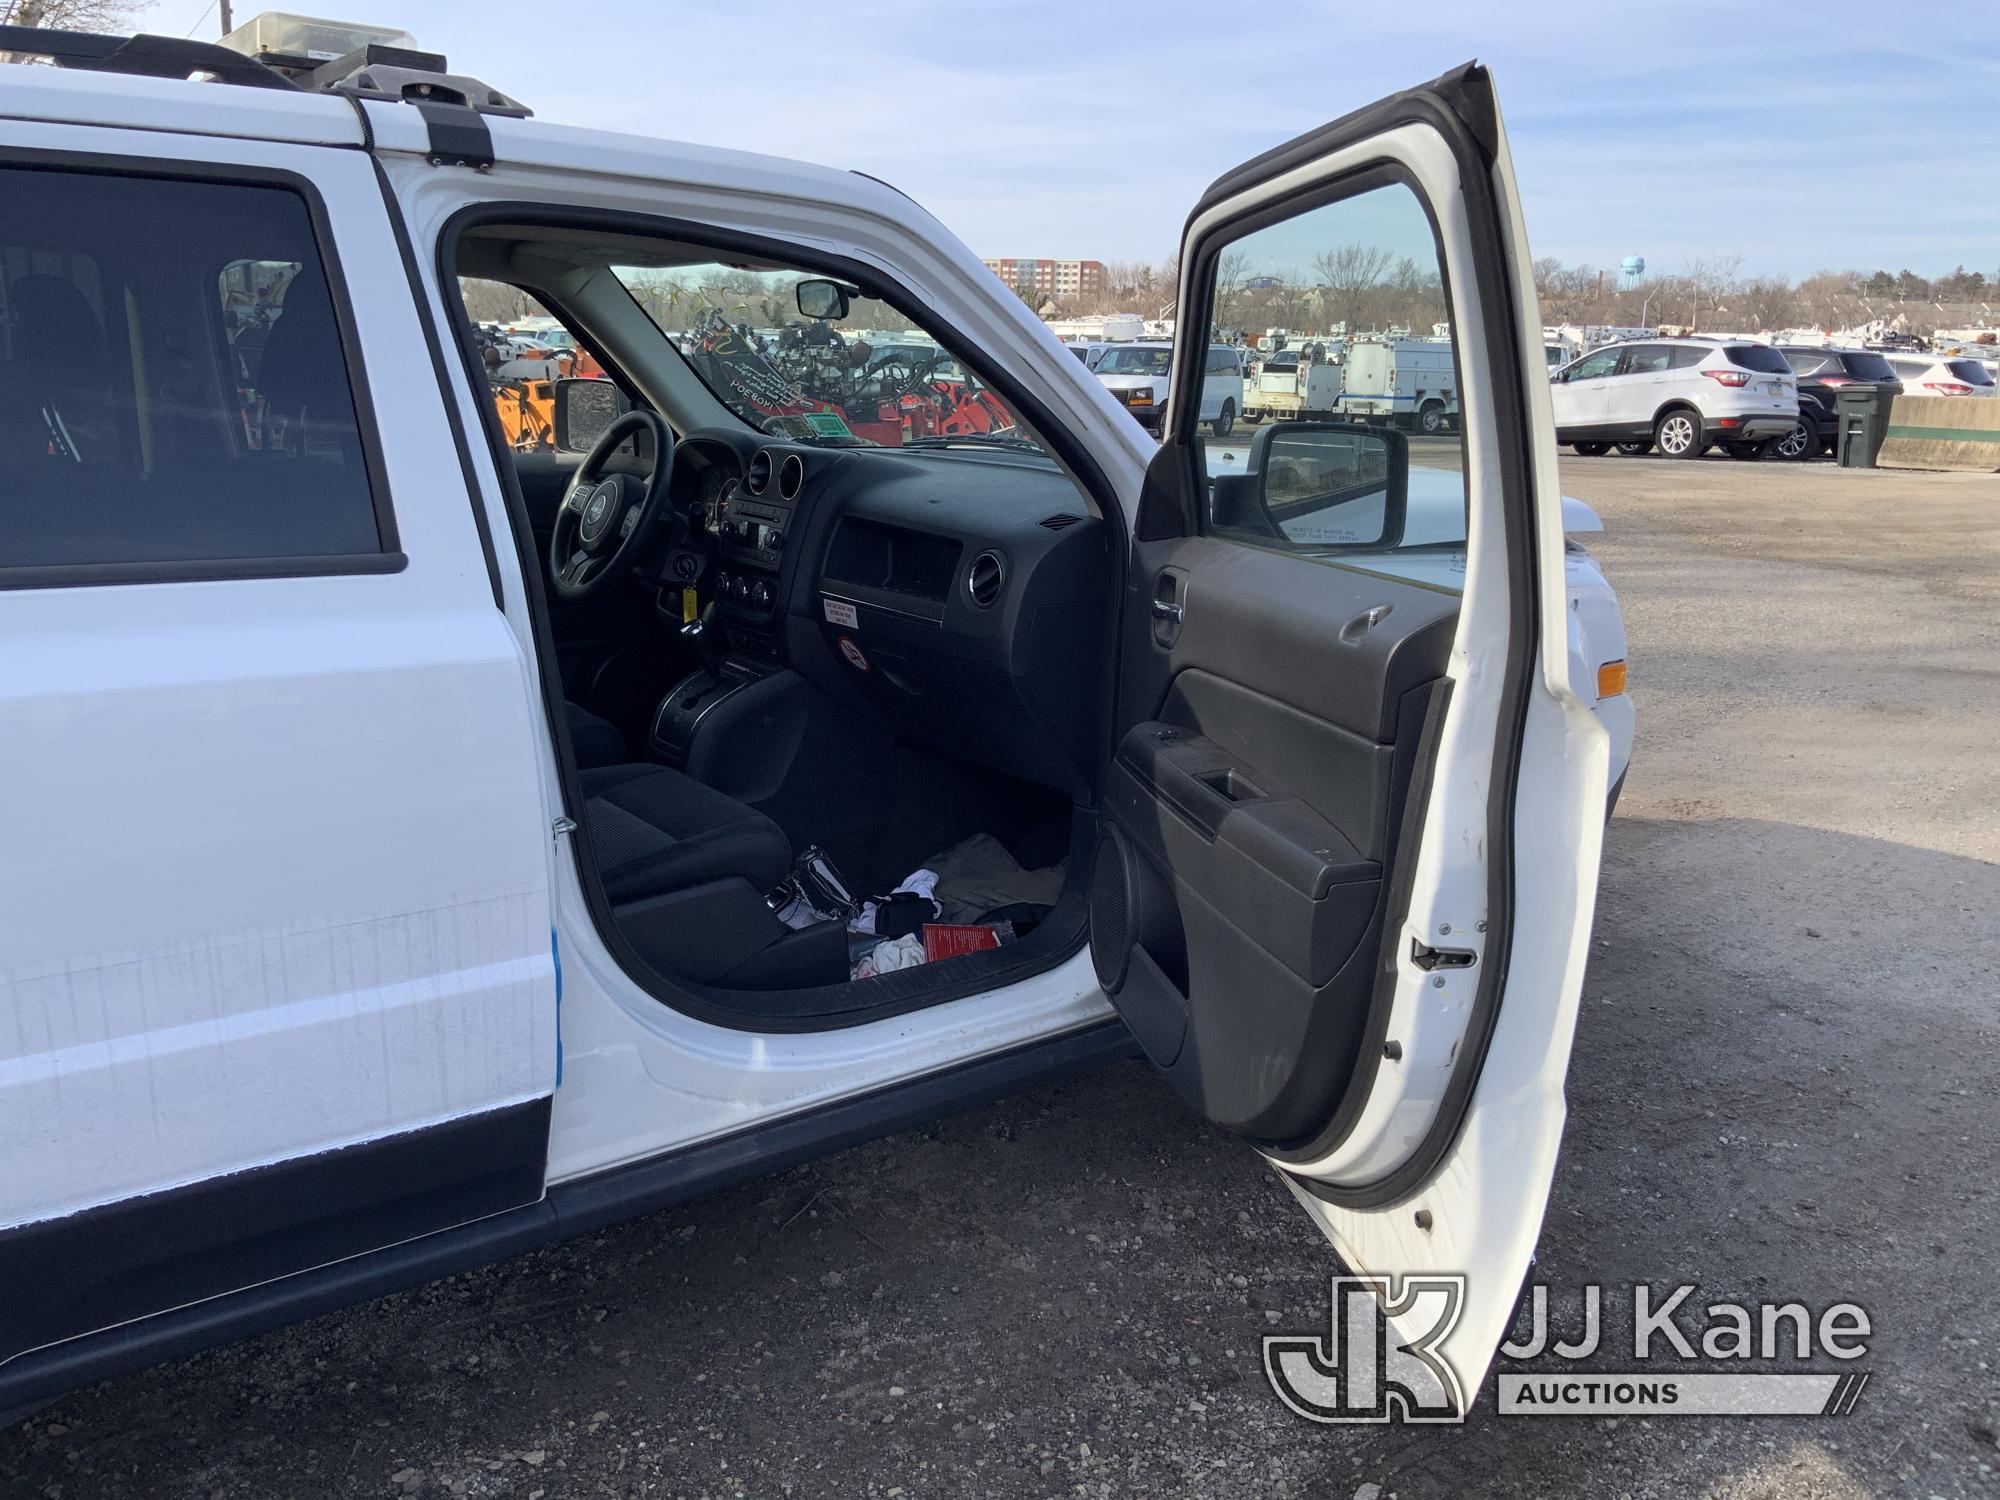 (Plymouth Meeting, PA) 2015 Jeep Patriot 4x4 4-Door Sport Utility Vehicle Runs & Moves, Check Engine